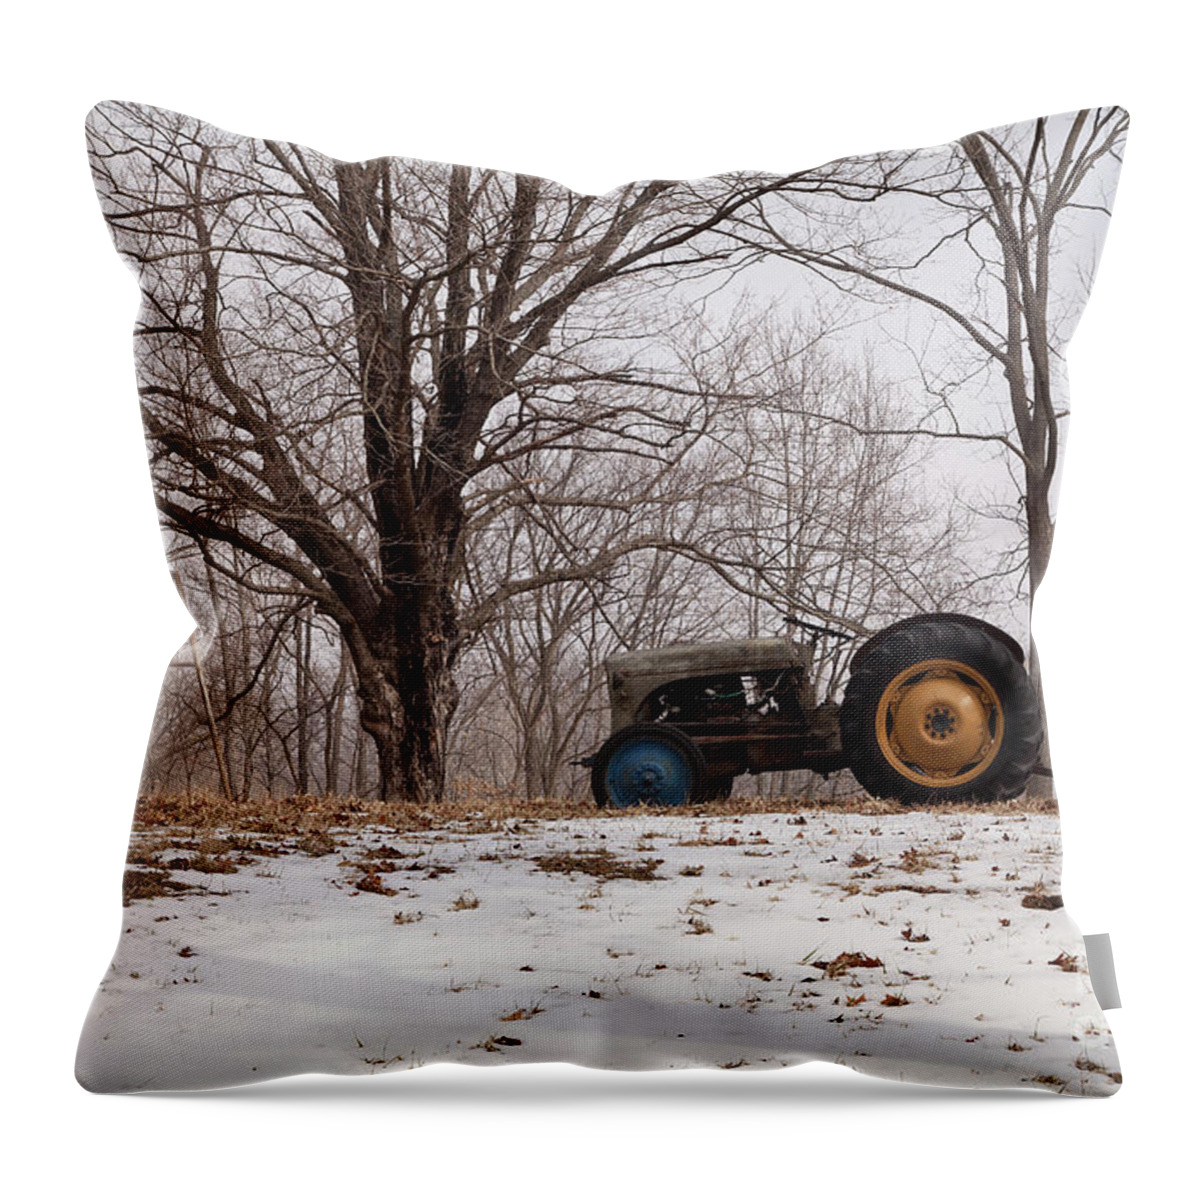 2014 Throw Pillow featuring the photograph Tractor by a Tree by Larry Braun